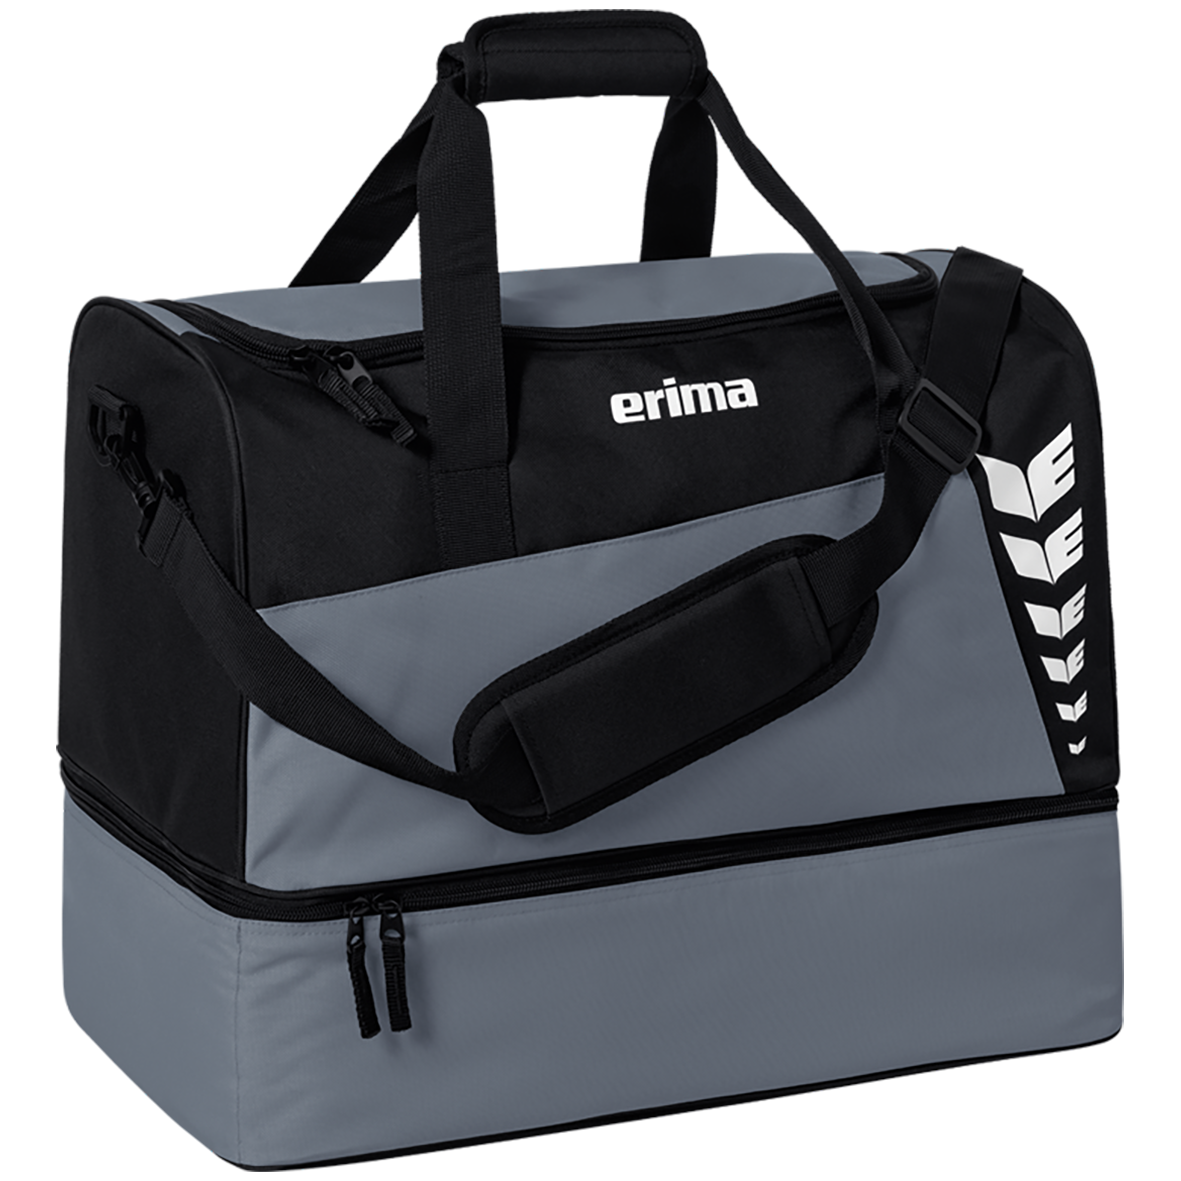 ERIMA SIX WINGS SPORTS BAG WITH BOTTOM COMPARTMENT, SLATE GREY-BLACK.